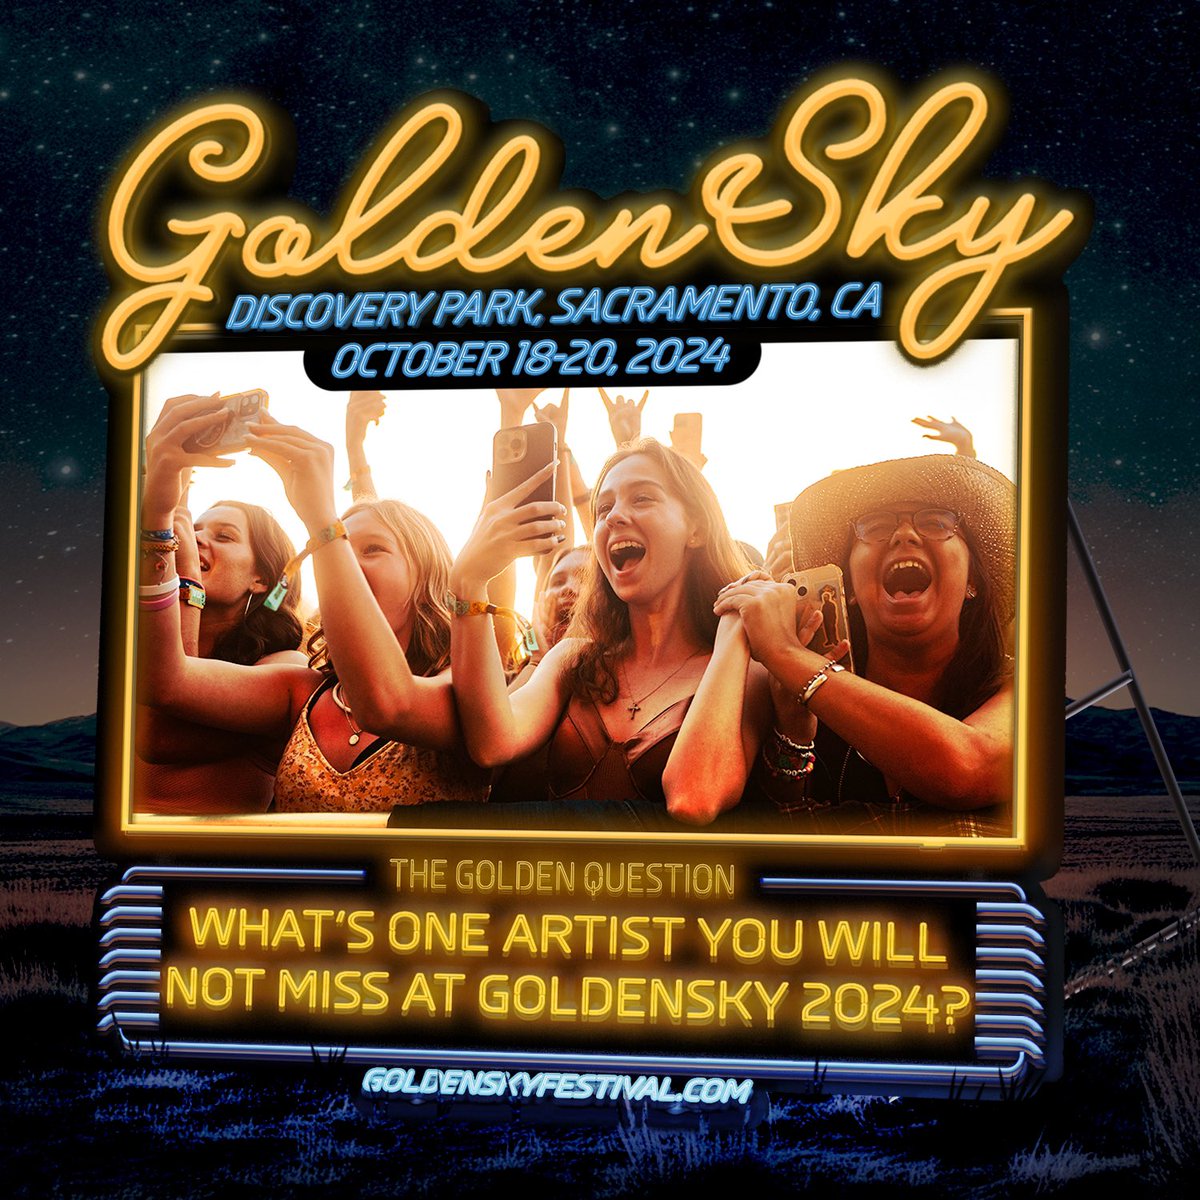 We’re already planning our GoldenSky must-sees (hint hint: it’s everyone😉)